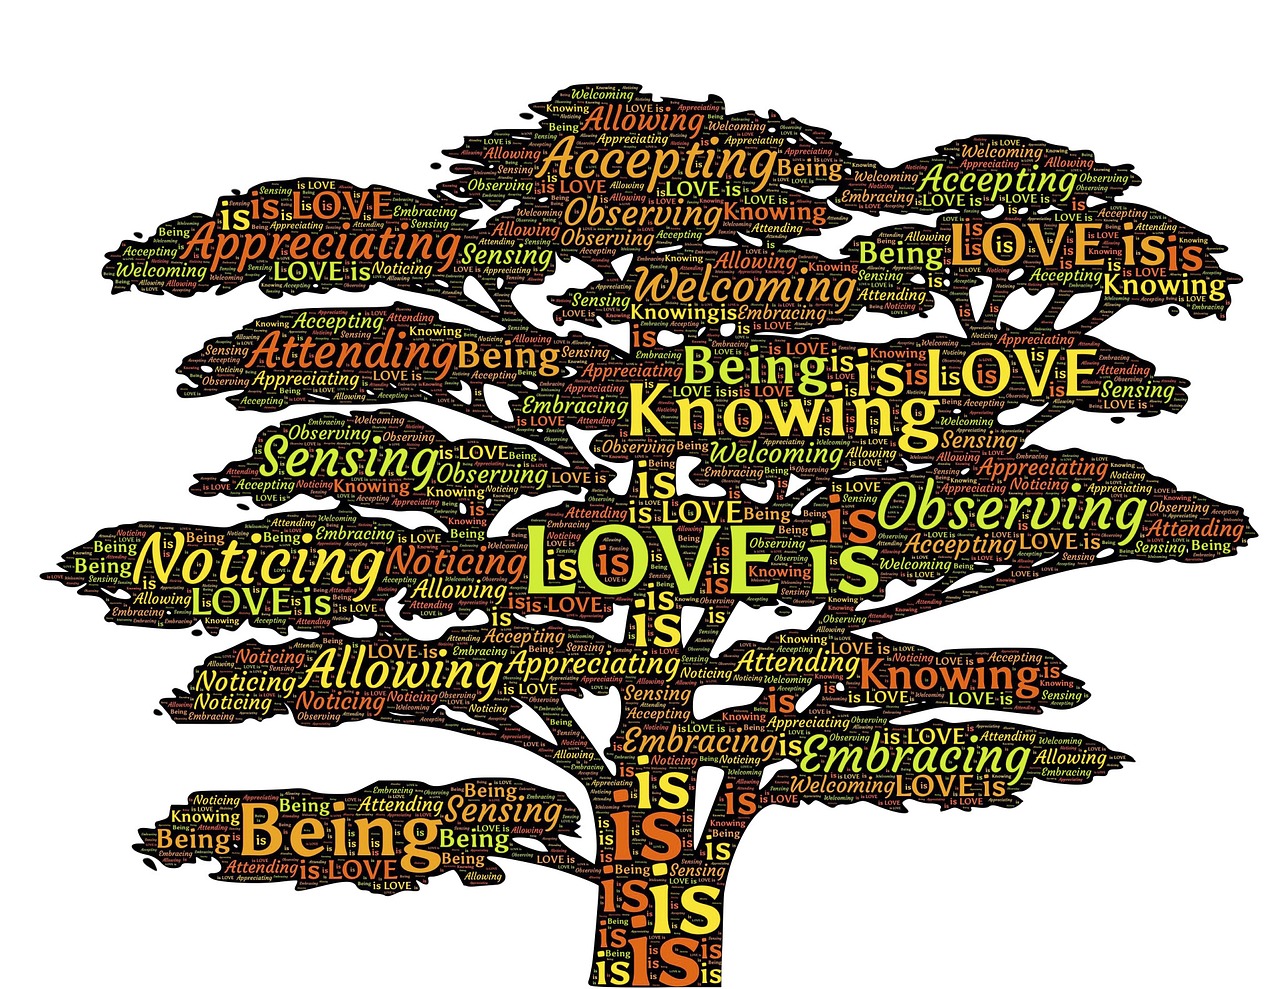 Love,tree,knowing,being,observing - free image from